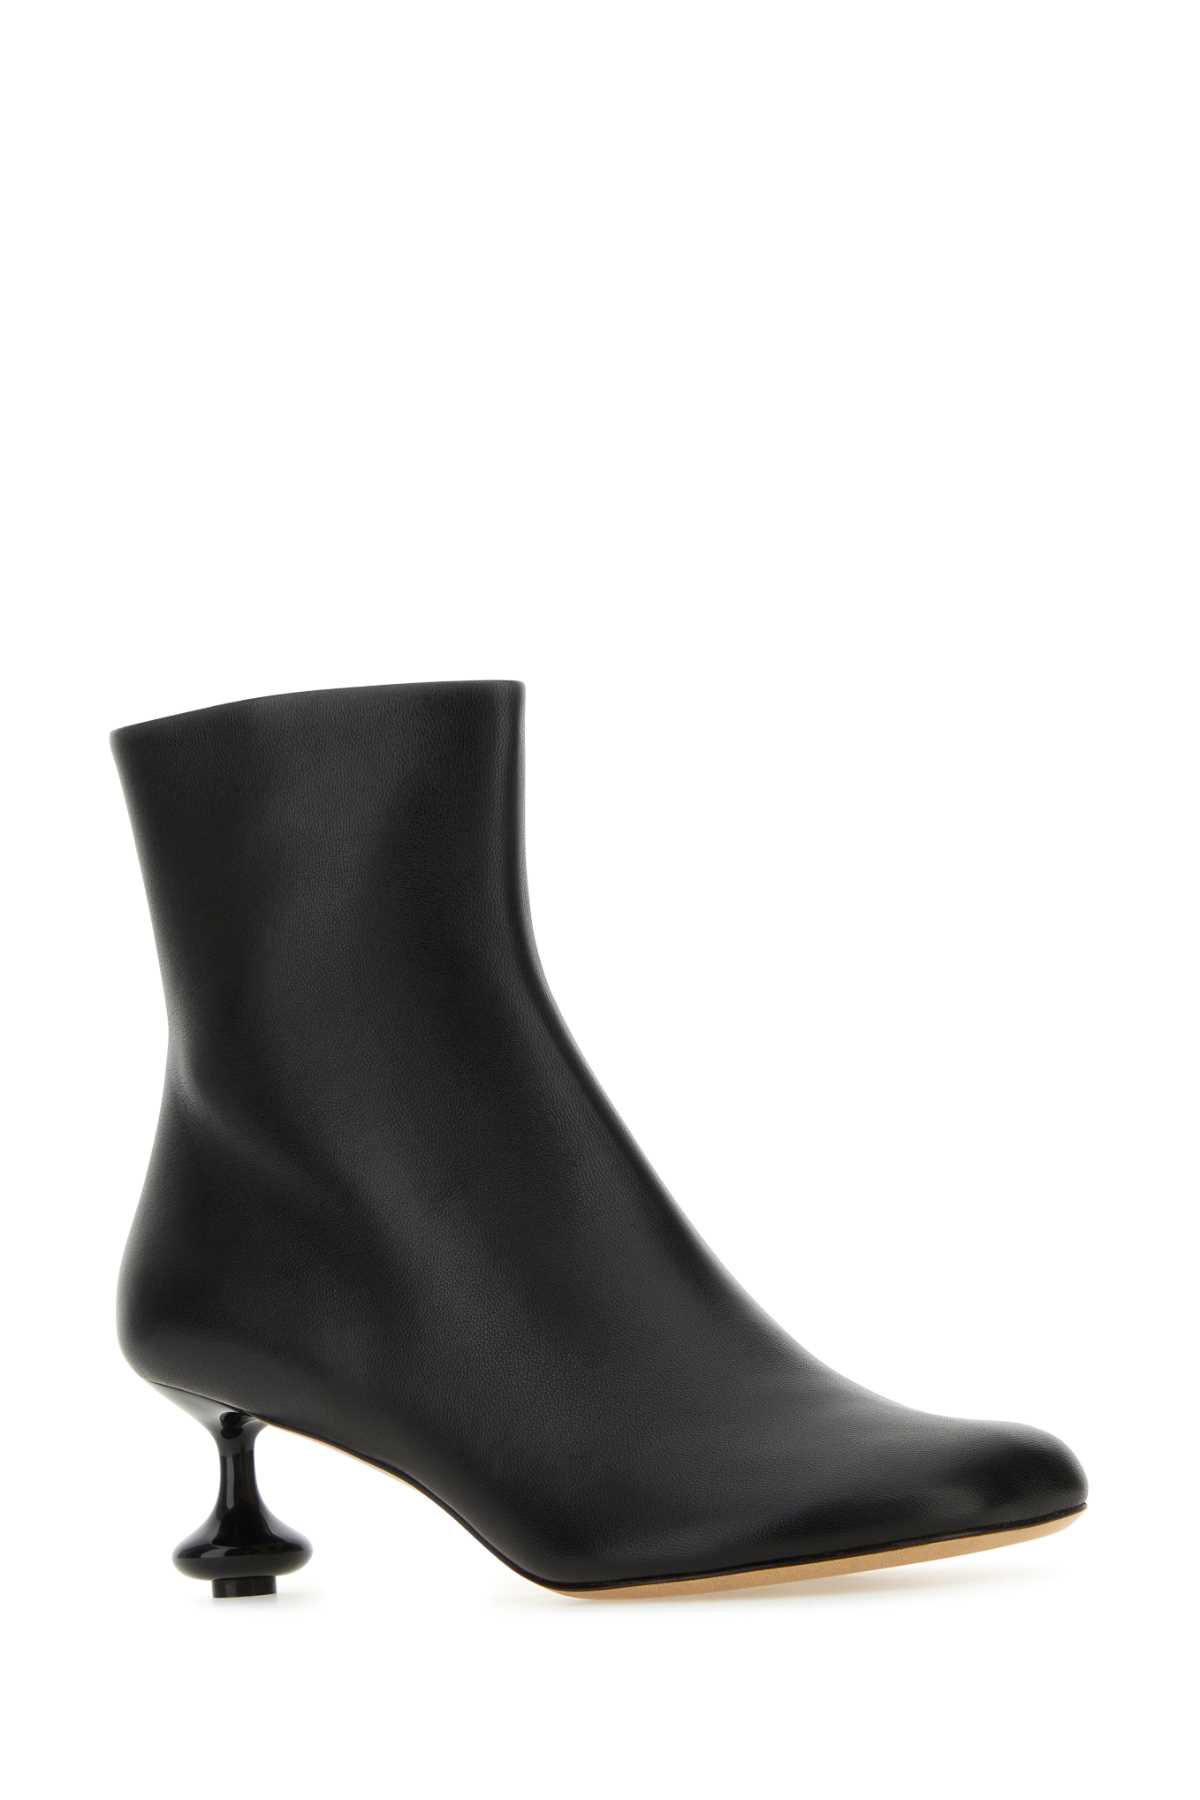 Loewe Black Nappa Leather Toy Ankle Boots